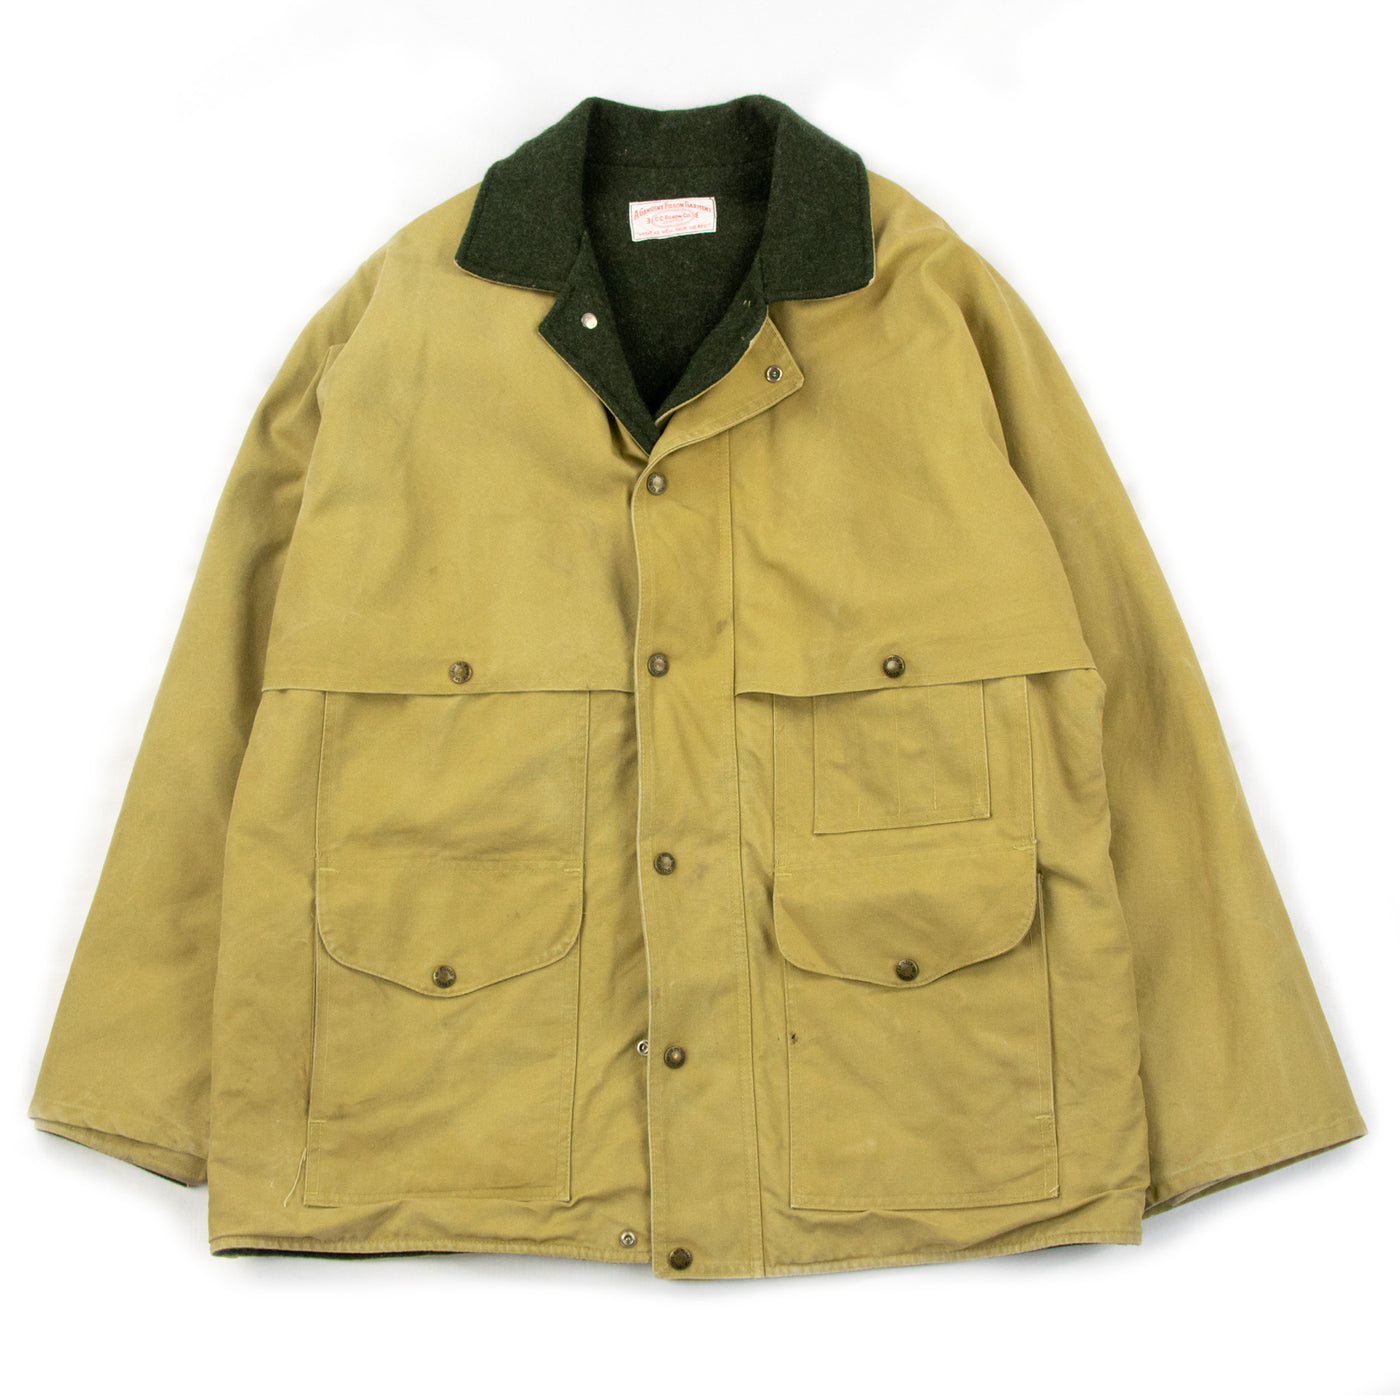 Vintage Filson Caped Canvas Cruiser Wool Lined Workwear Jacket Beige - L / XL Front